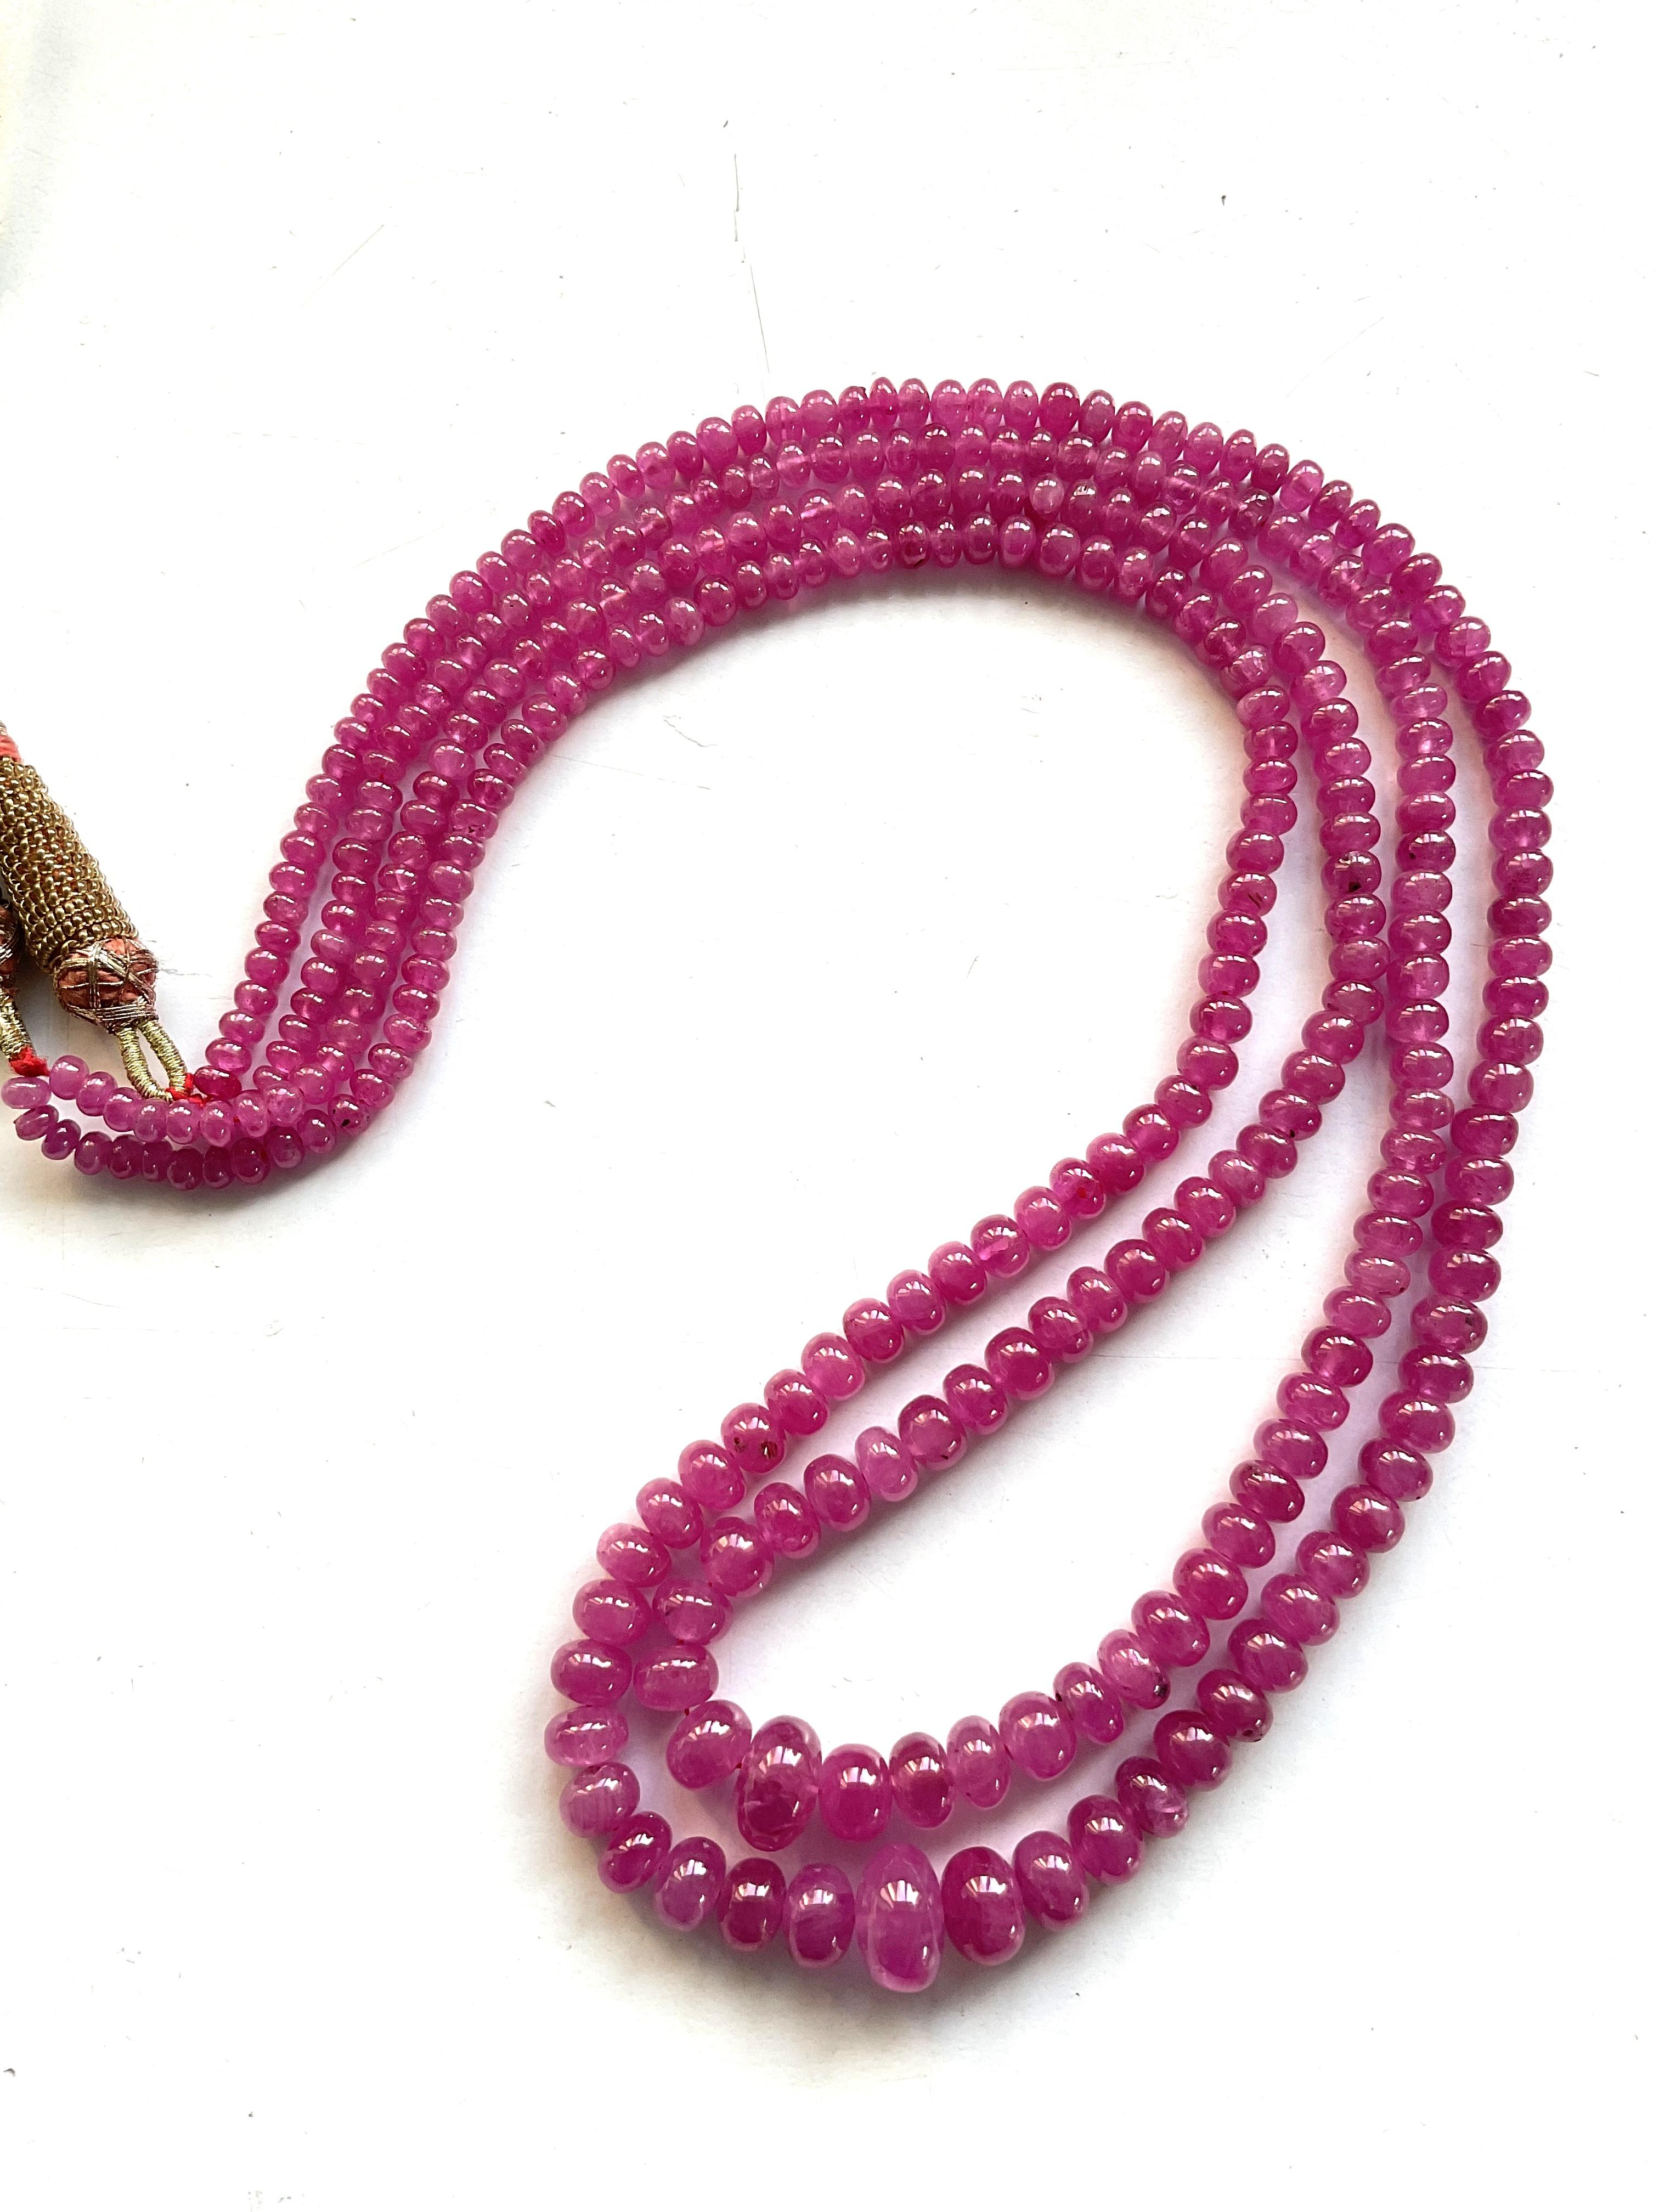 179.32 Carats Burma Ruby Heated Beaded Necklace Top Quality Natural Gemstone 6